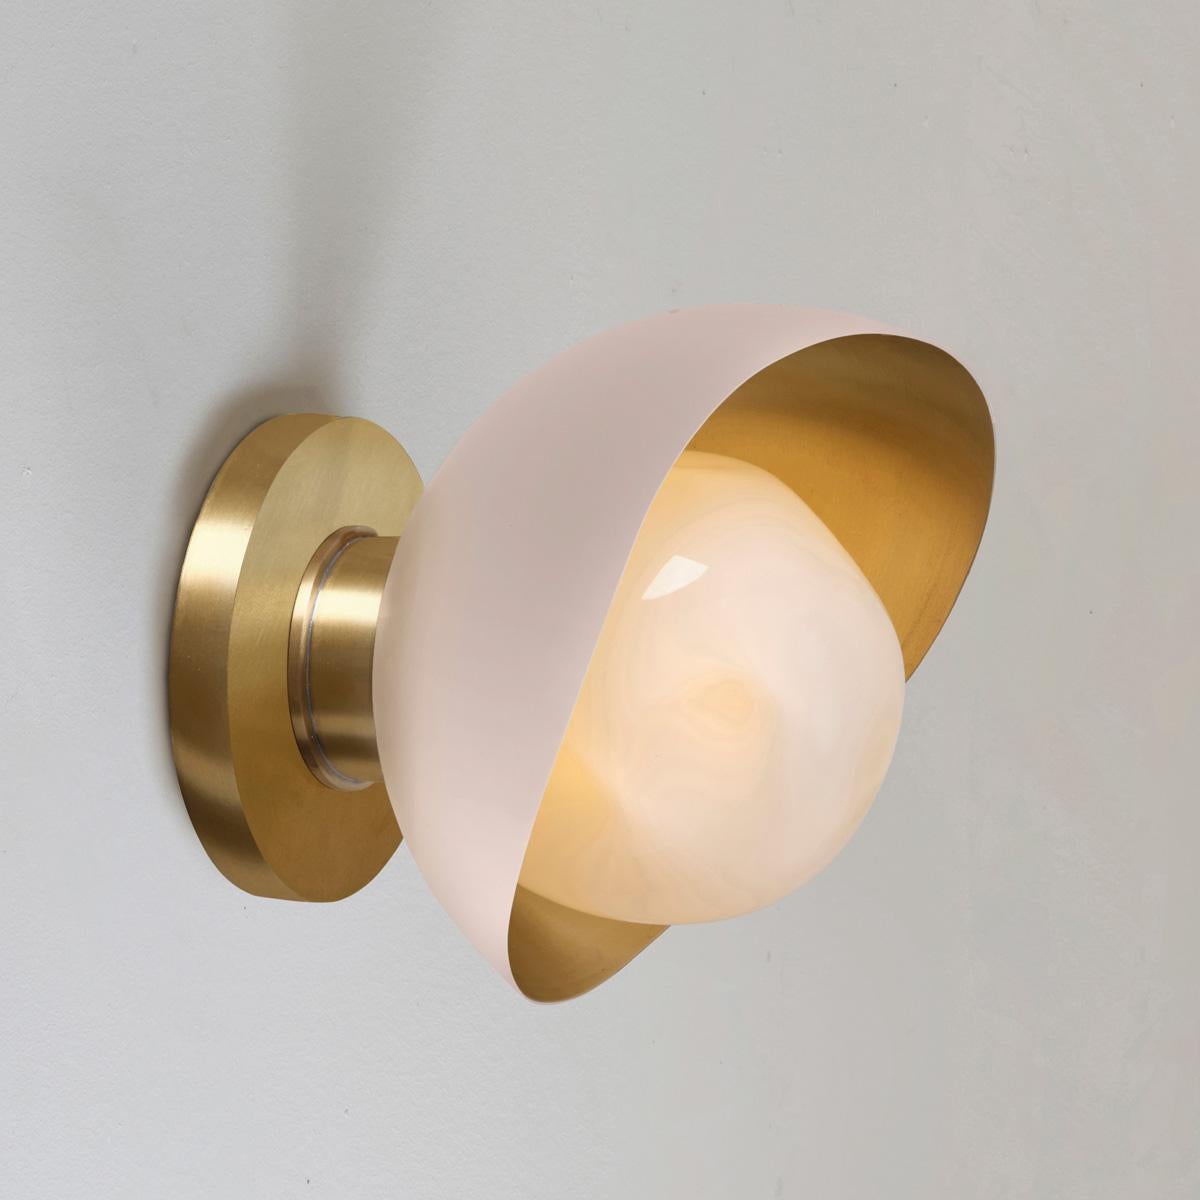 Perla Mini Wall Light by Gaspare Asaro. Bronze and Satin Brass Finish In New Condition For Sale In New York, NY